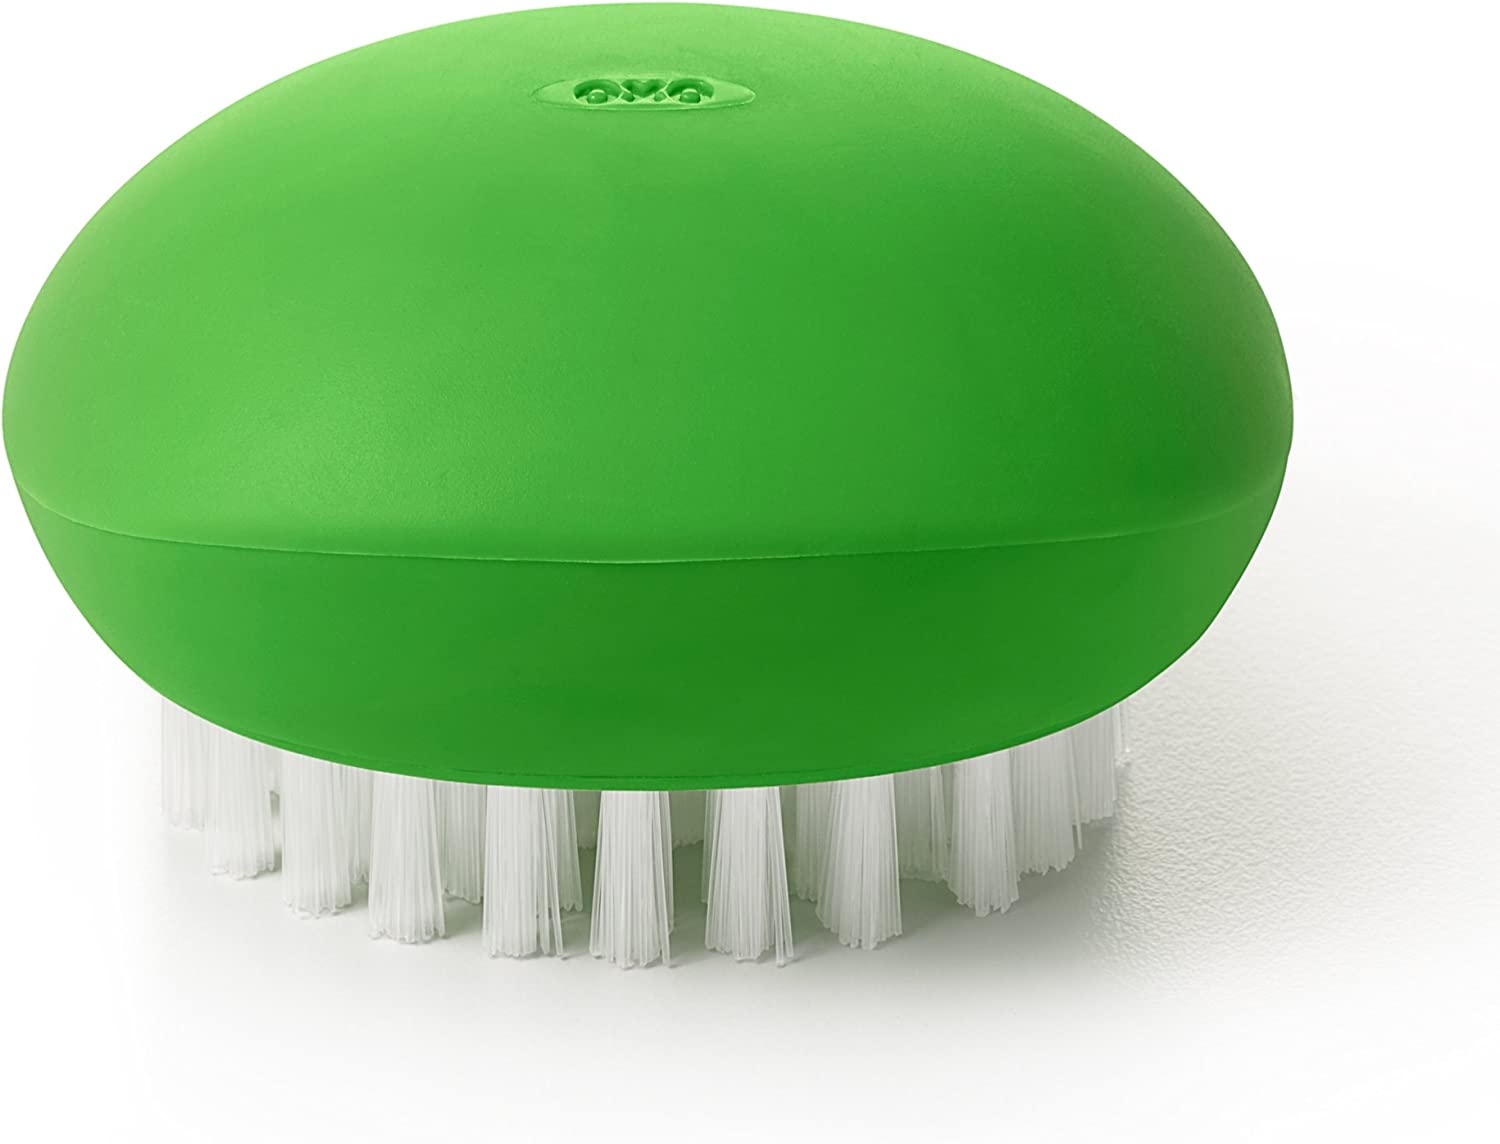 OXO Good Grips Vegetable Brush Import To Shop ×Product customization General Description Gallery Reviews Variations